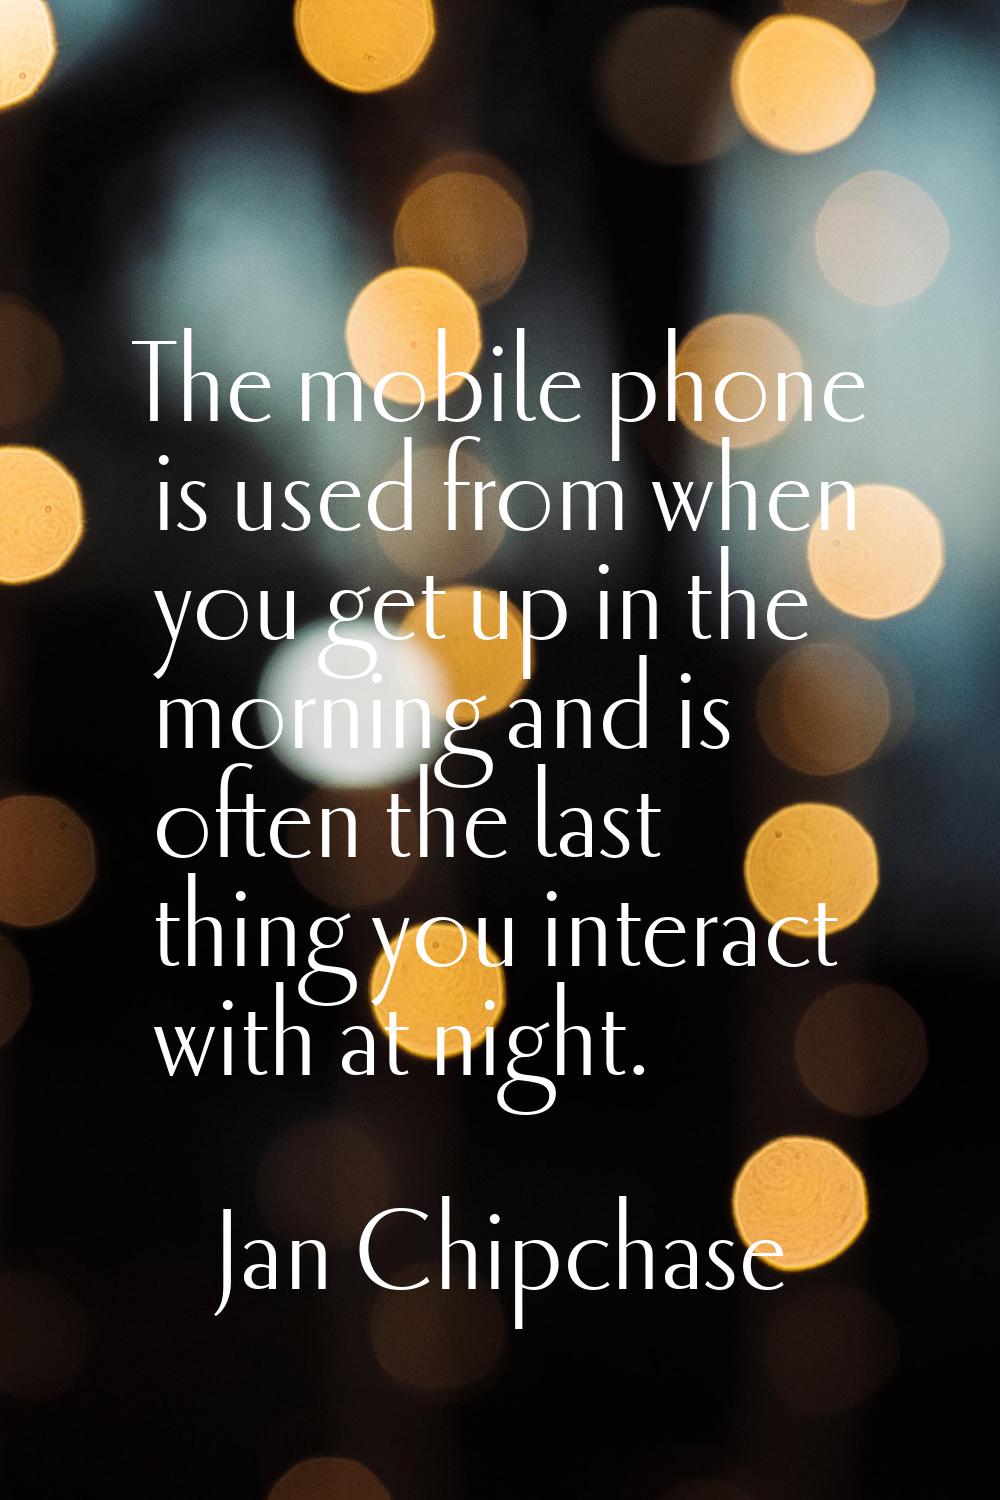 The mobile phone is used from when you get up in the morning and is often the last thing you intera